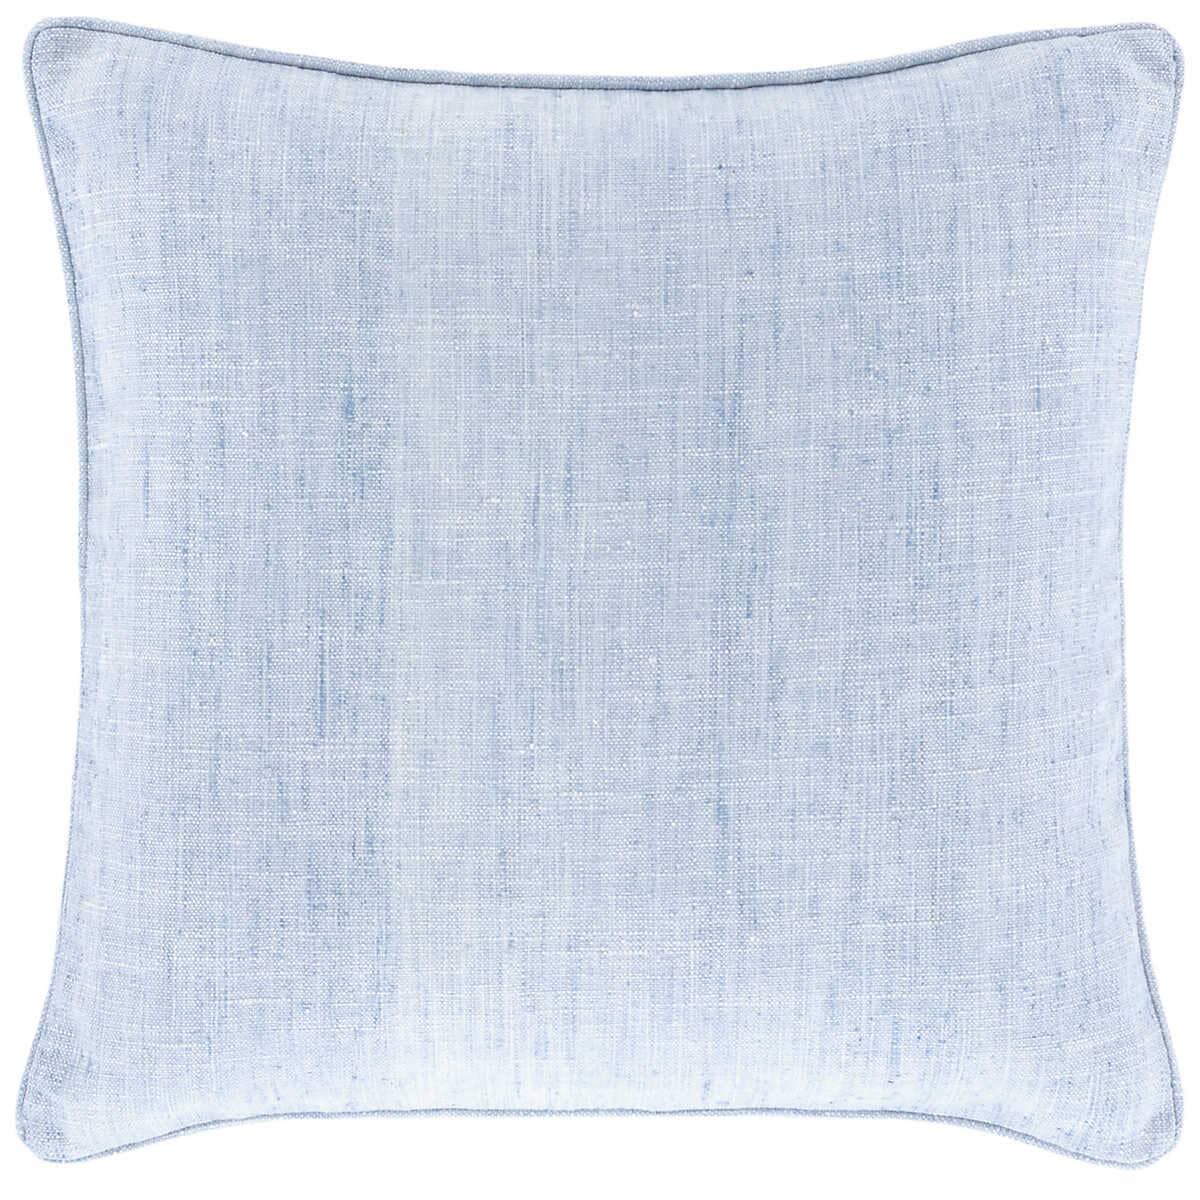 Greylock French Blue Indoor/Outdoor Pillow with Insert Pillows 